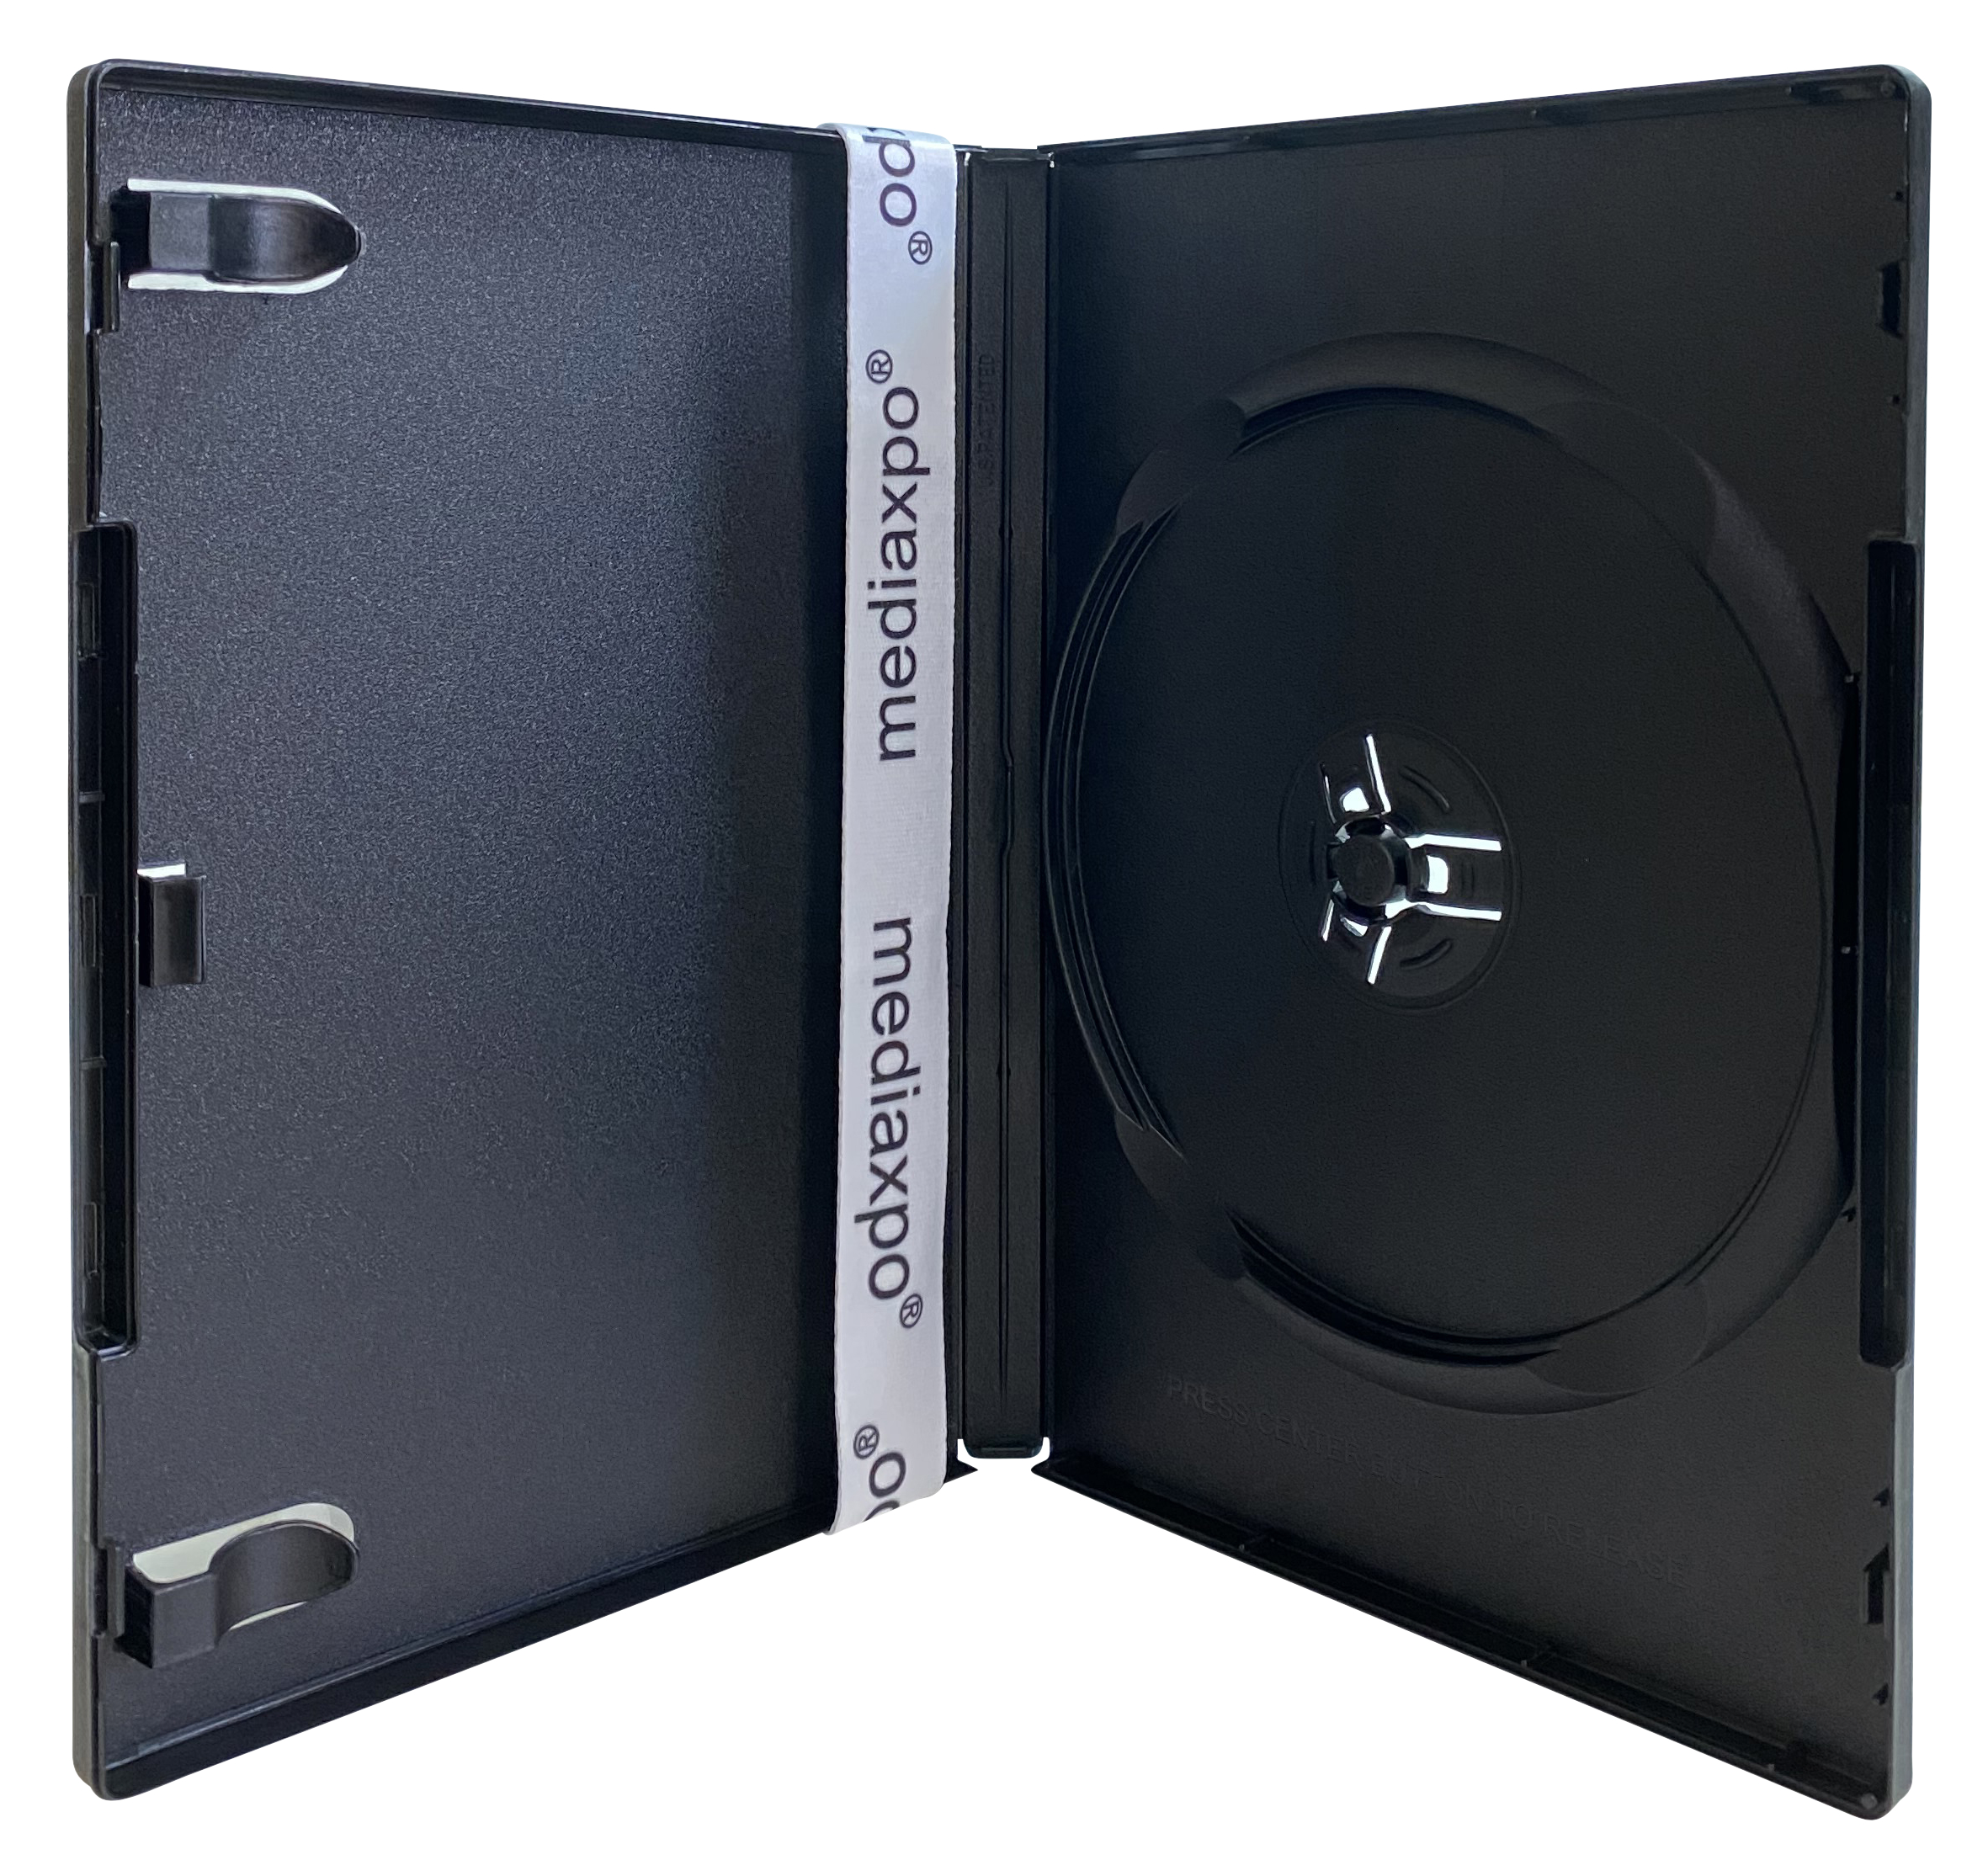 Image of ID 1214259180 1200 PREMIUM STANDARD Black Single DVD Cases 14MM (100% New Material)